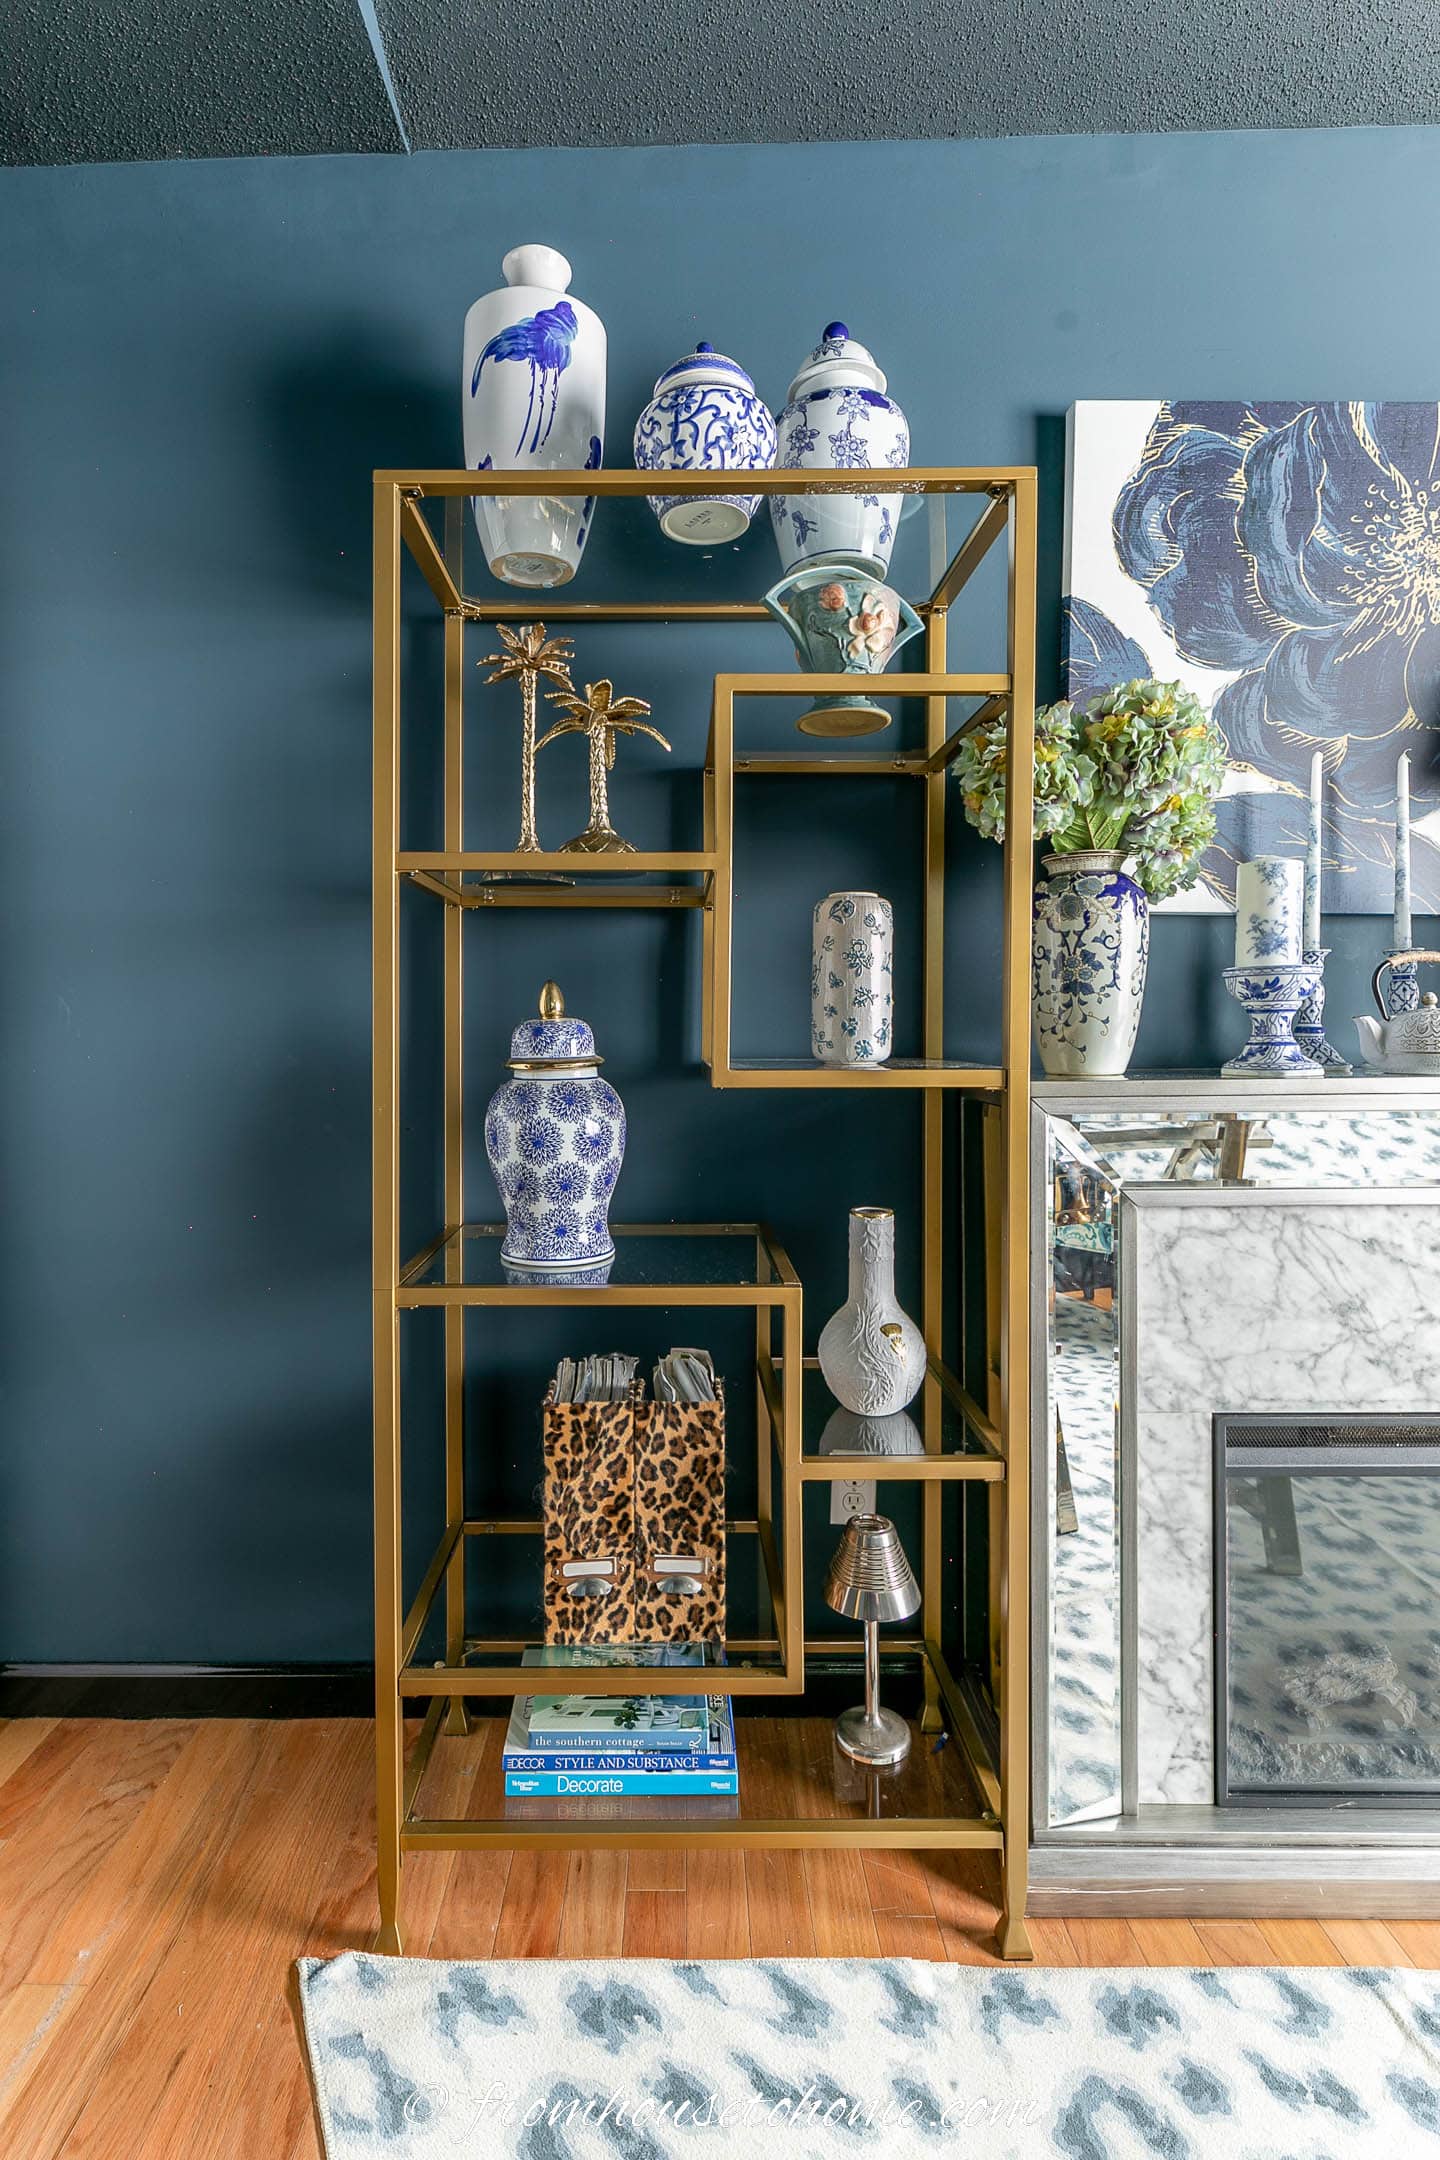 A gold etagere shelf decorated with blue and white vases